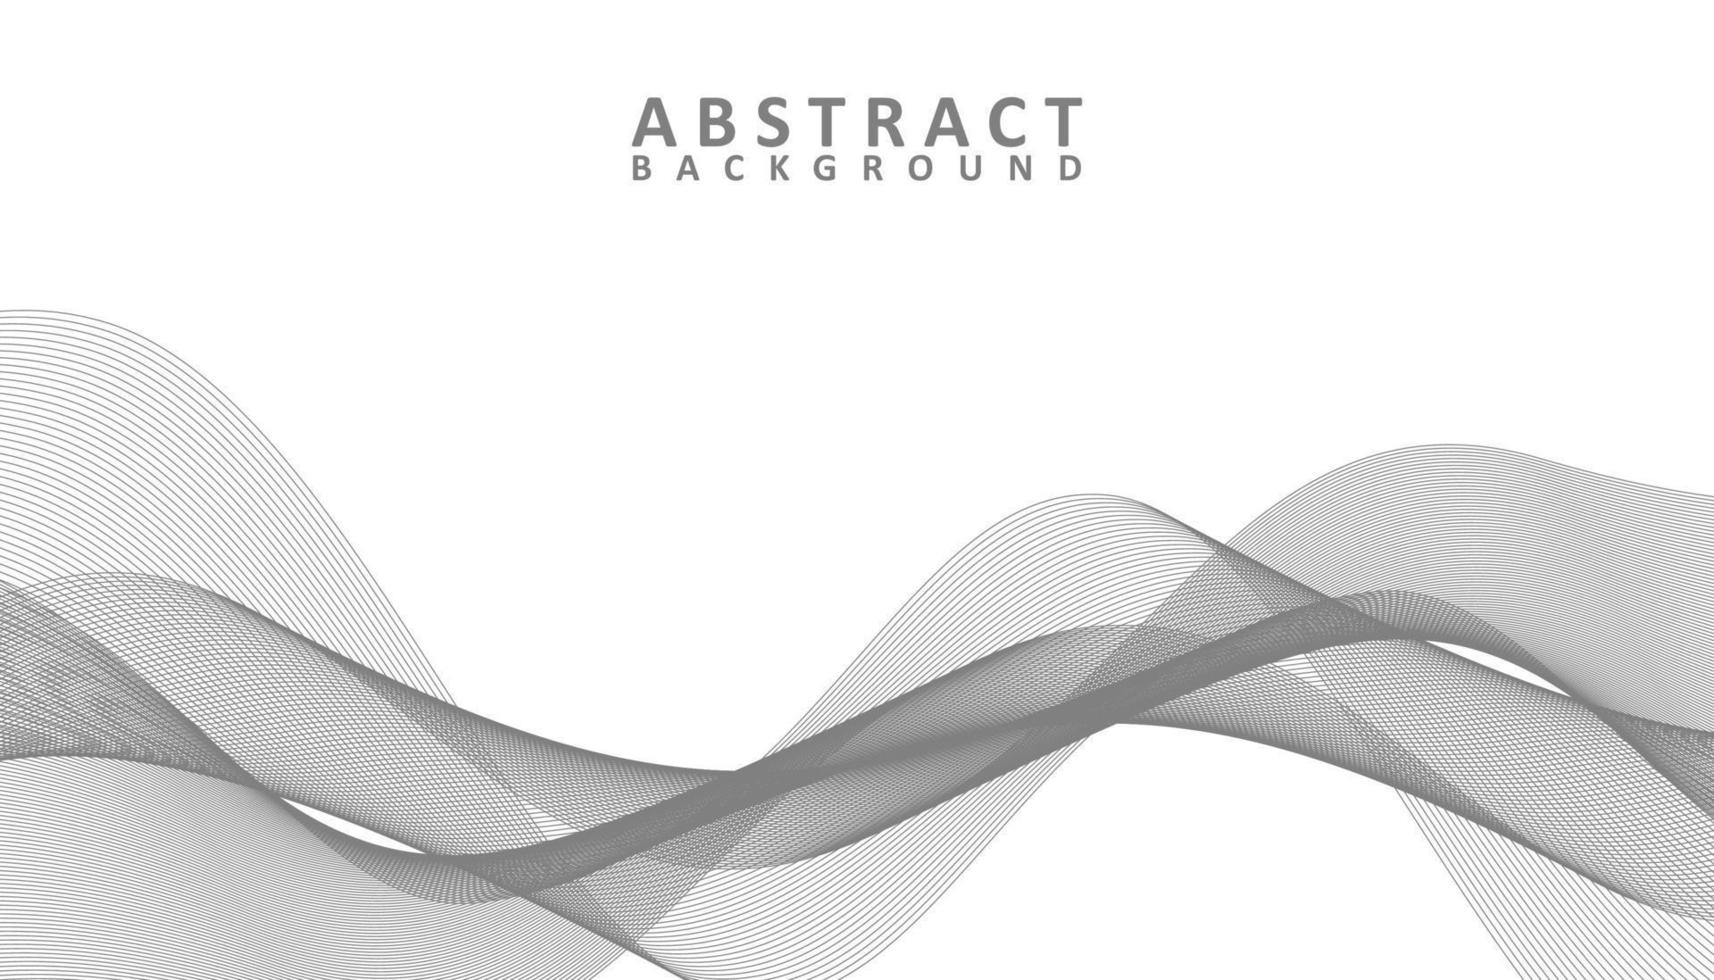 Abstract grey and white waves background vector